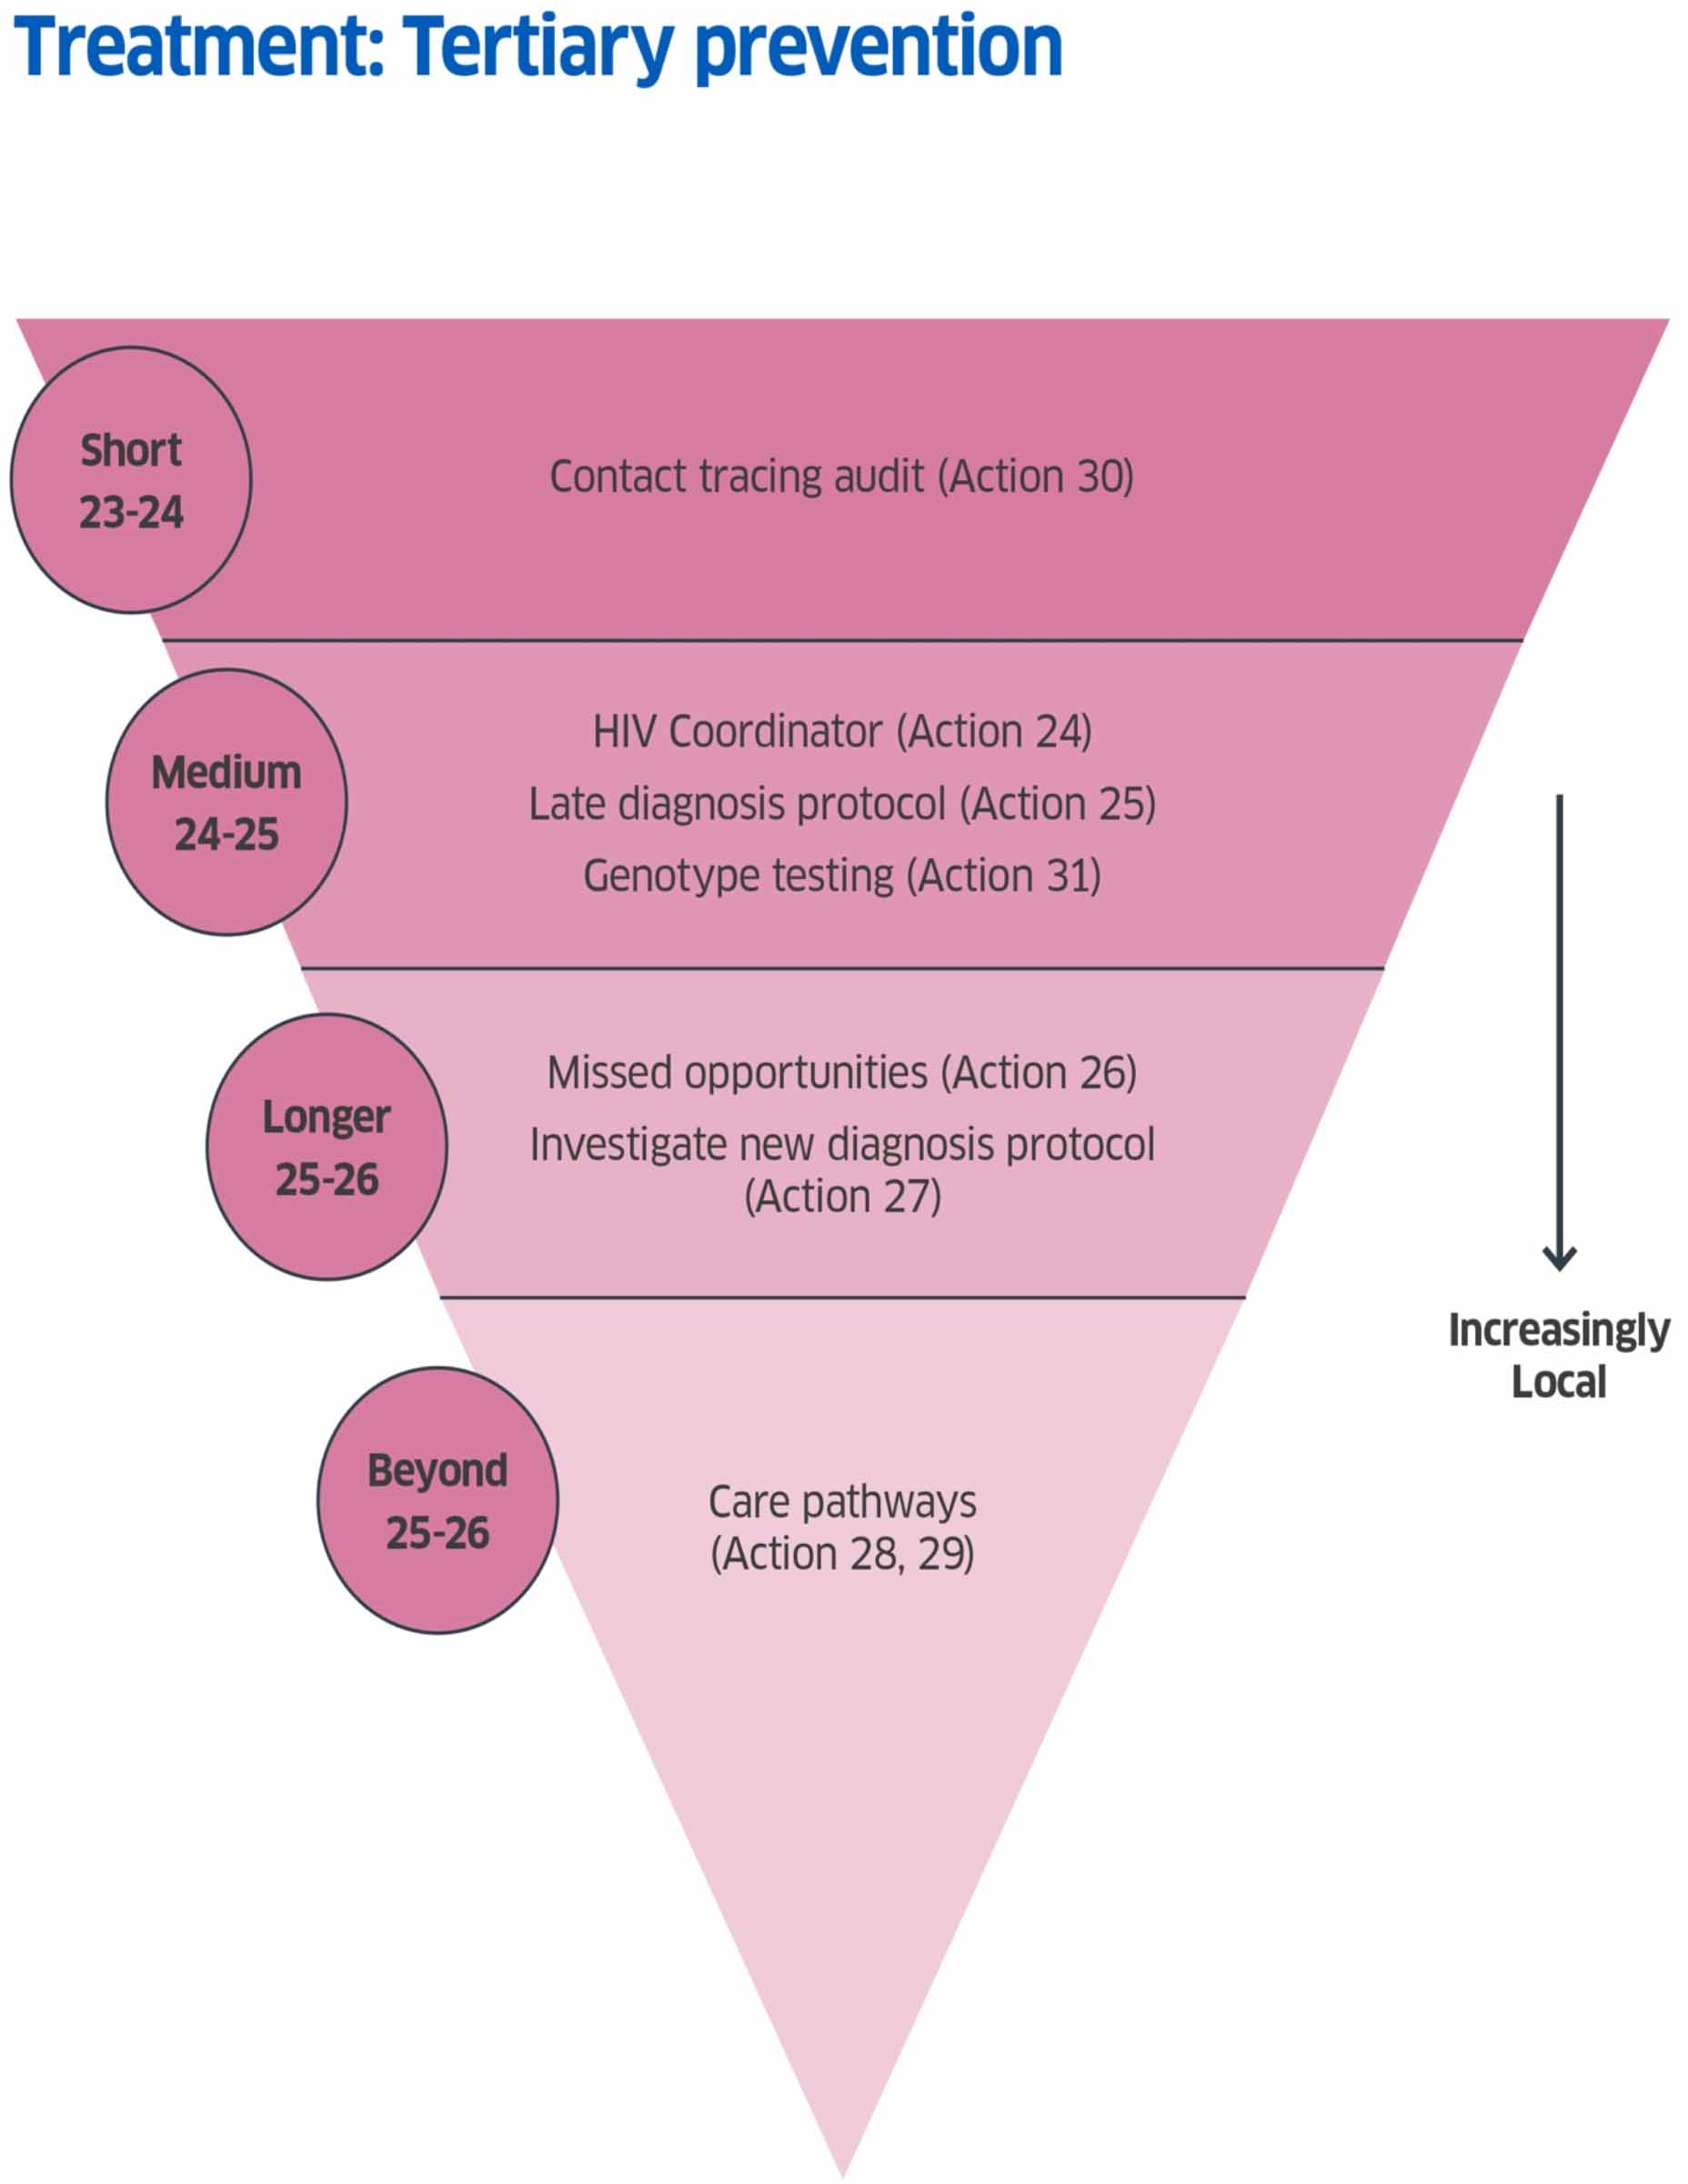 An inverted triangle showing the Tertiary prevention actions for short, medium, longer and beyond 2025/26 and incidence decline